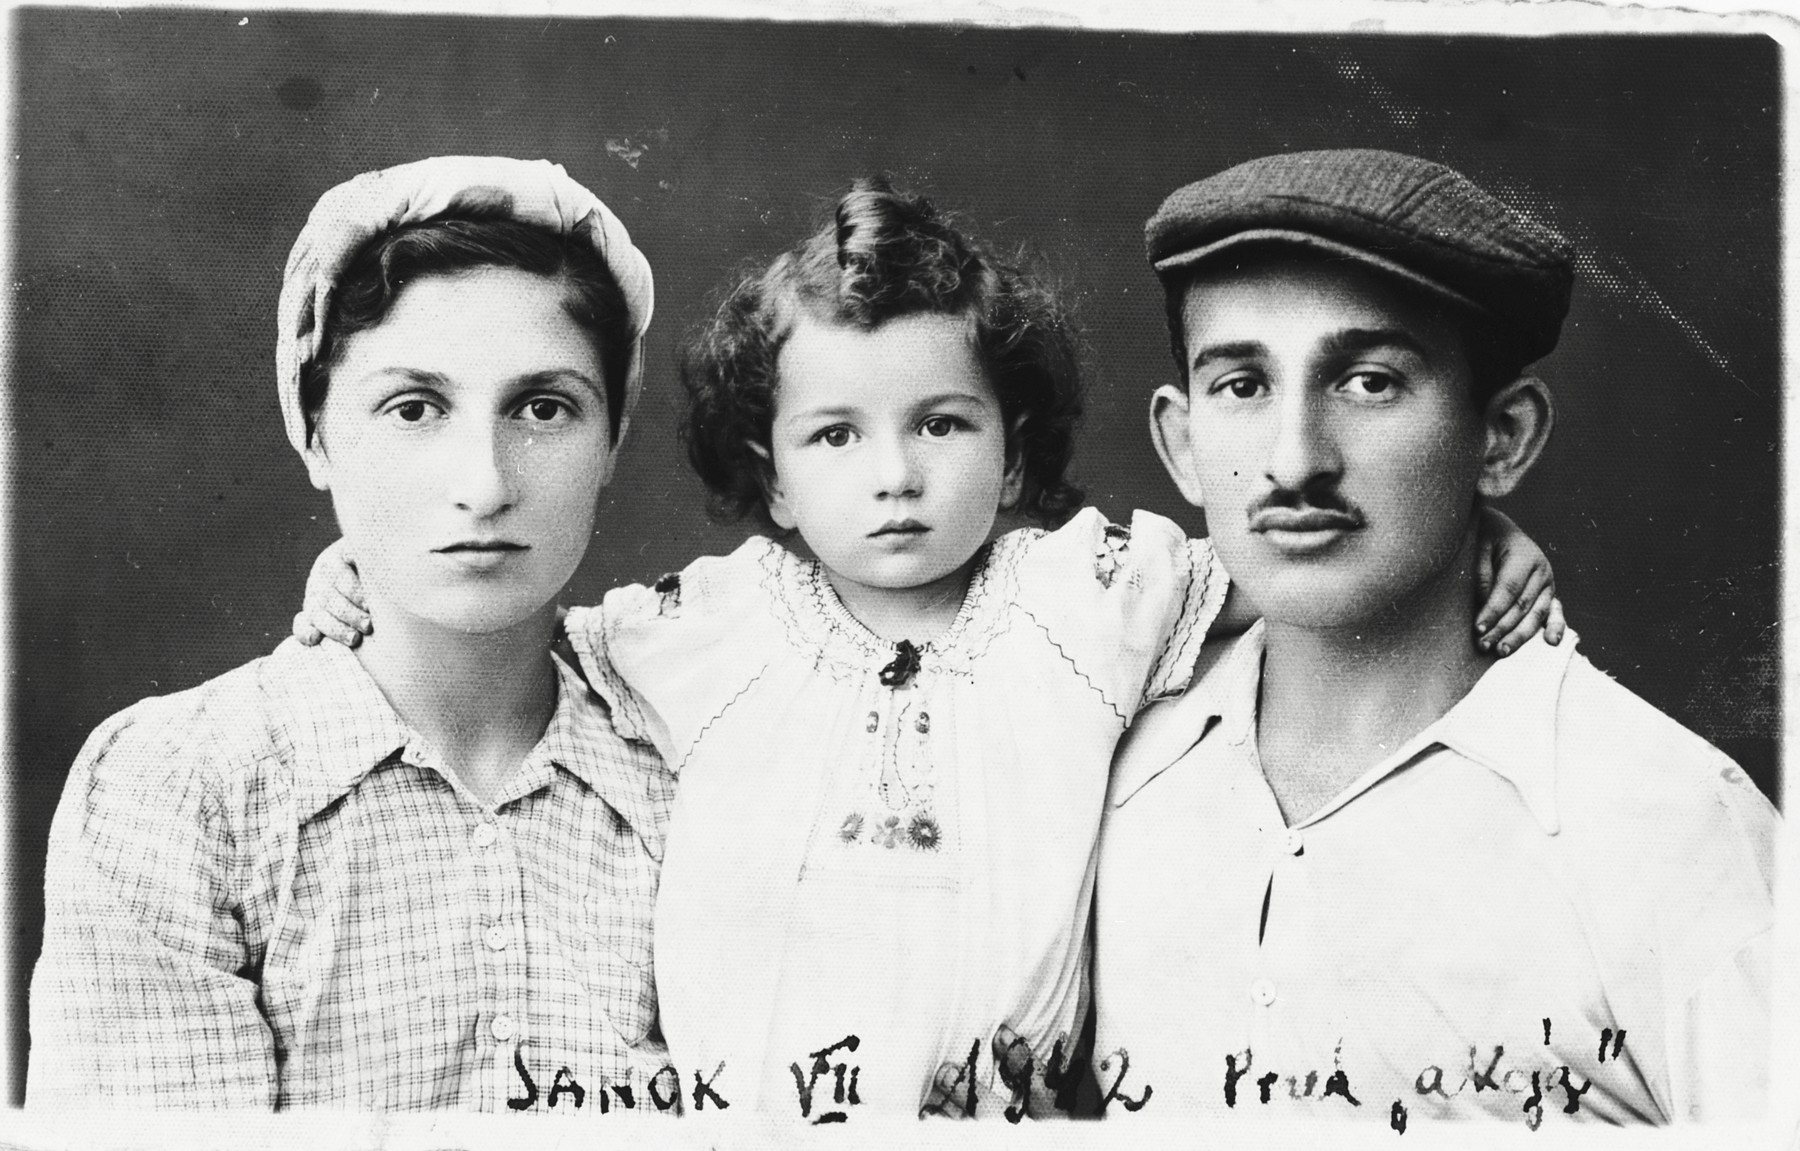 Studio portrait of the Majranc family taken shortly before they went into hiding.

Pictured from left to right are Steffa, Marylka and Tadek Majranc.